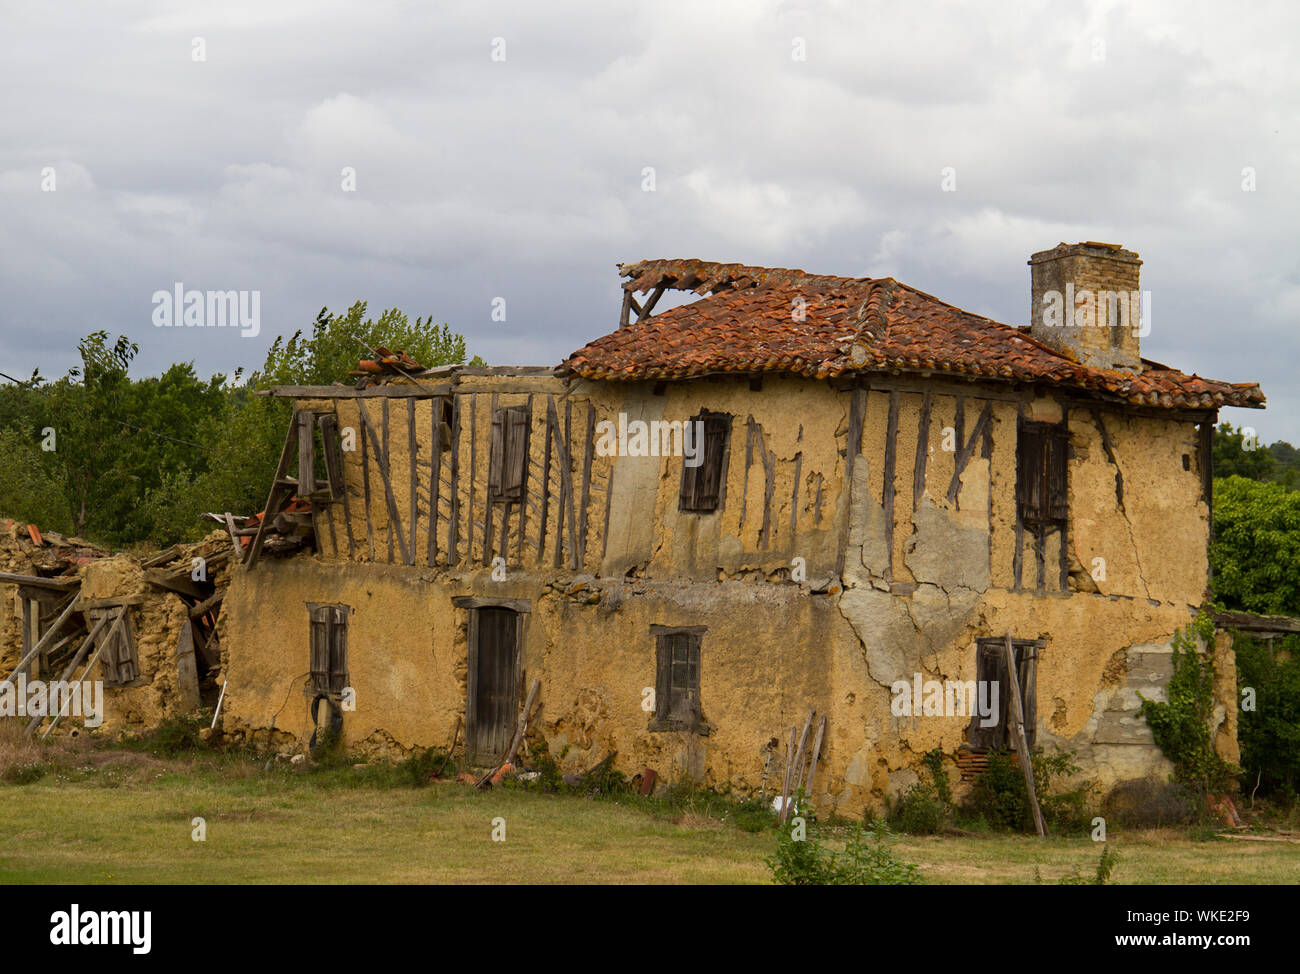 Ruin of an abandoned house in France Stock Photo